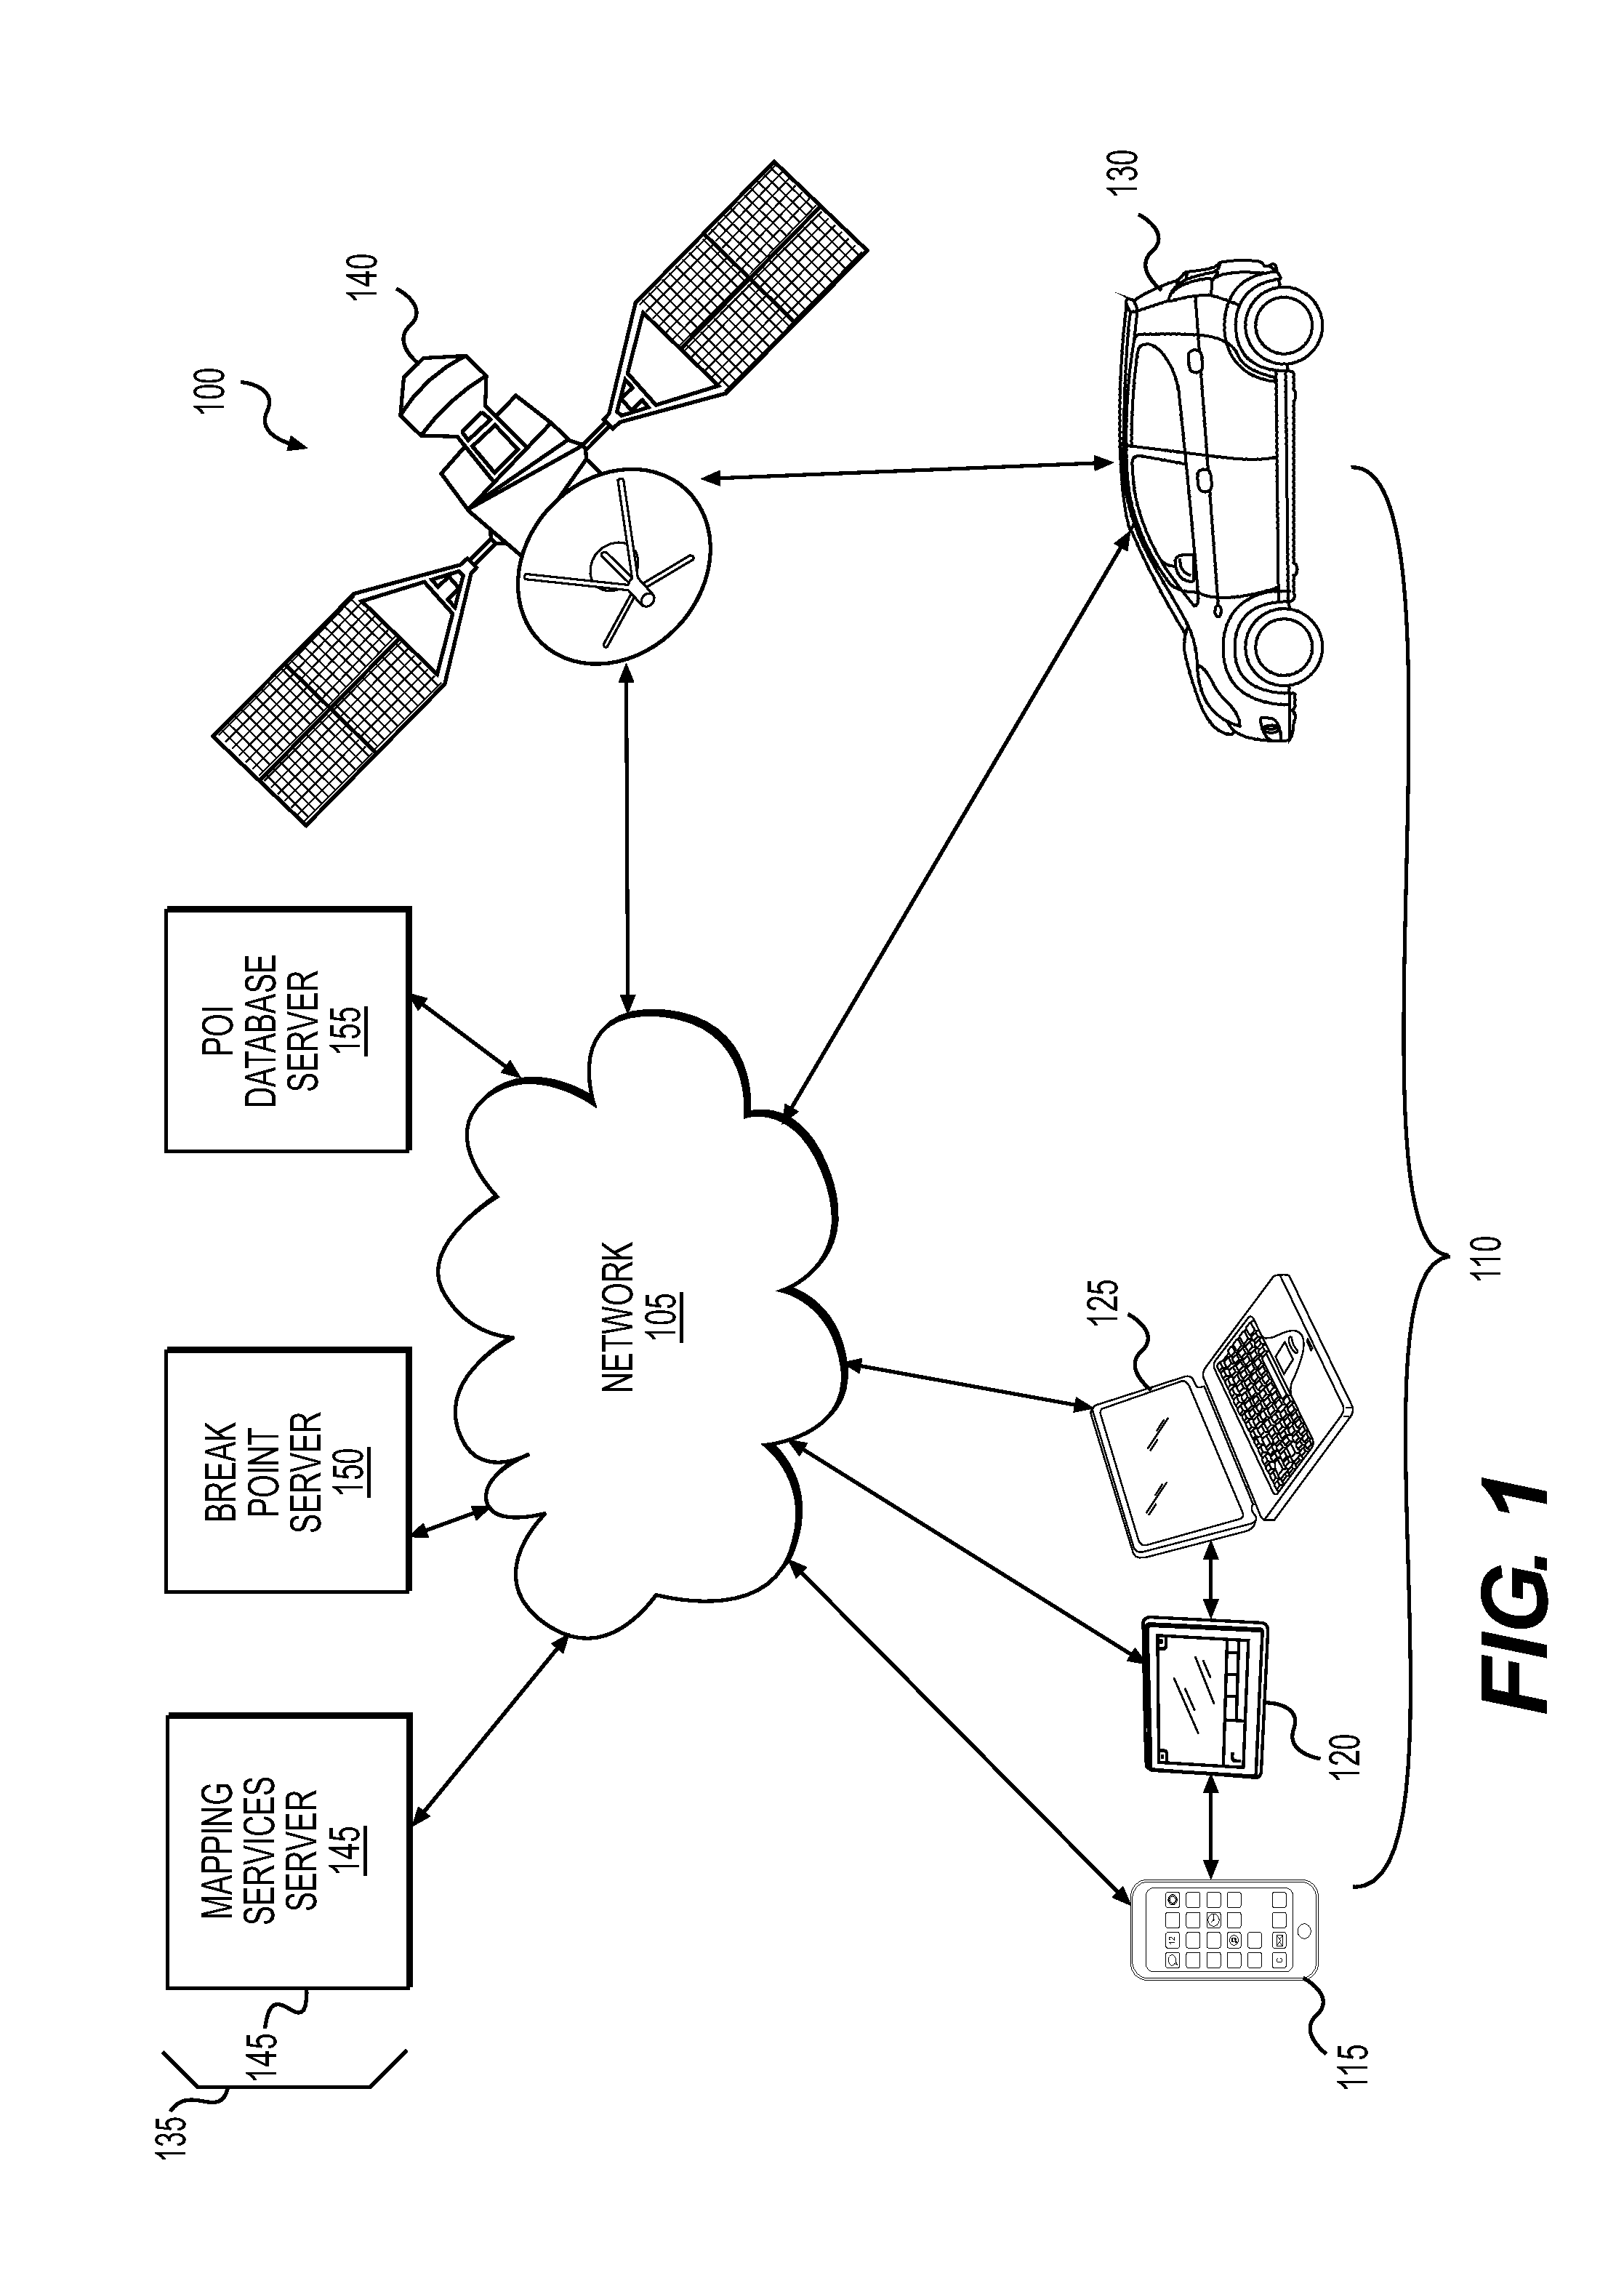 Systems and methods for initiating mapping exit routines and rating highway exits